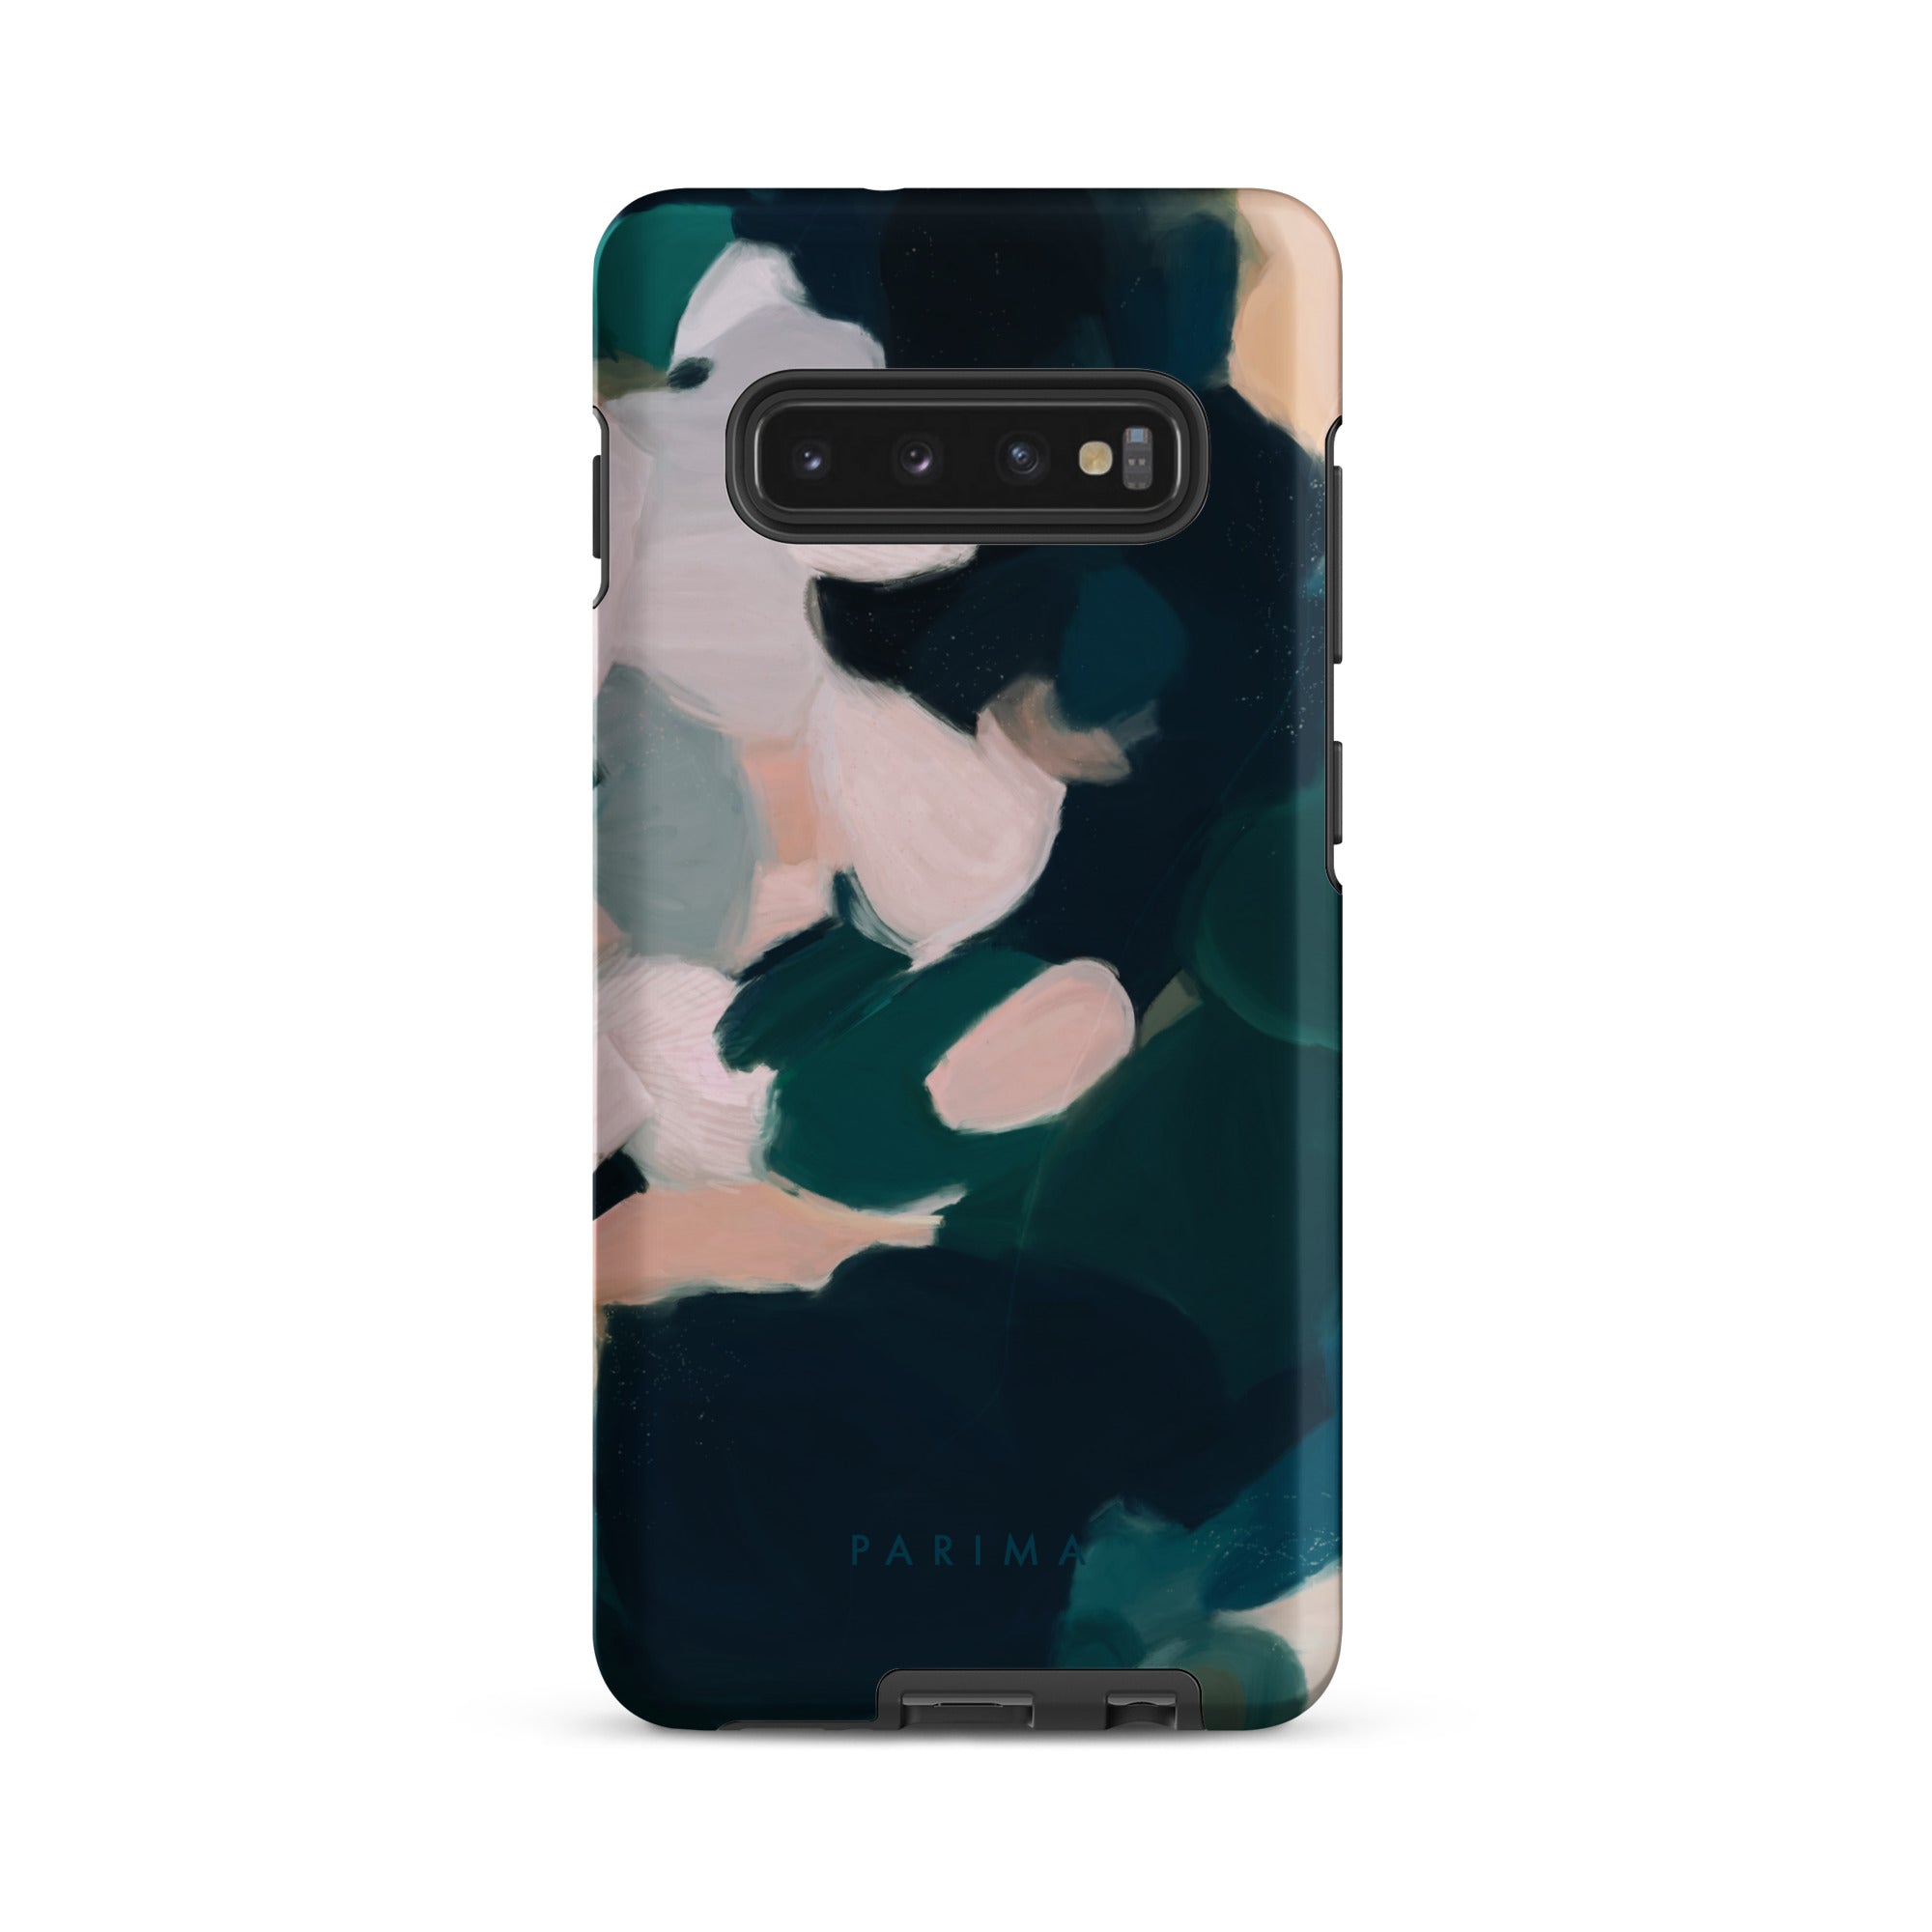 Aerwyn, green and pink abstract art on Samsung Galaxy S10 Plus tough case by Parima Studio